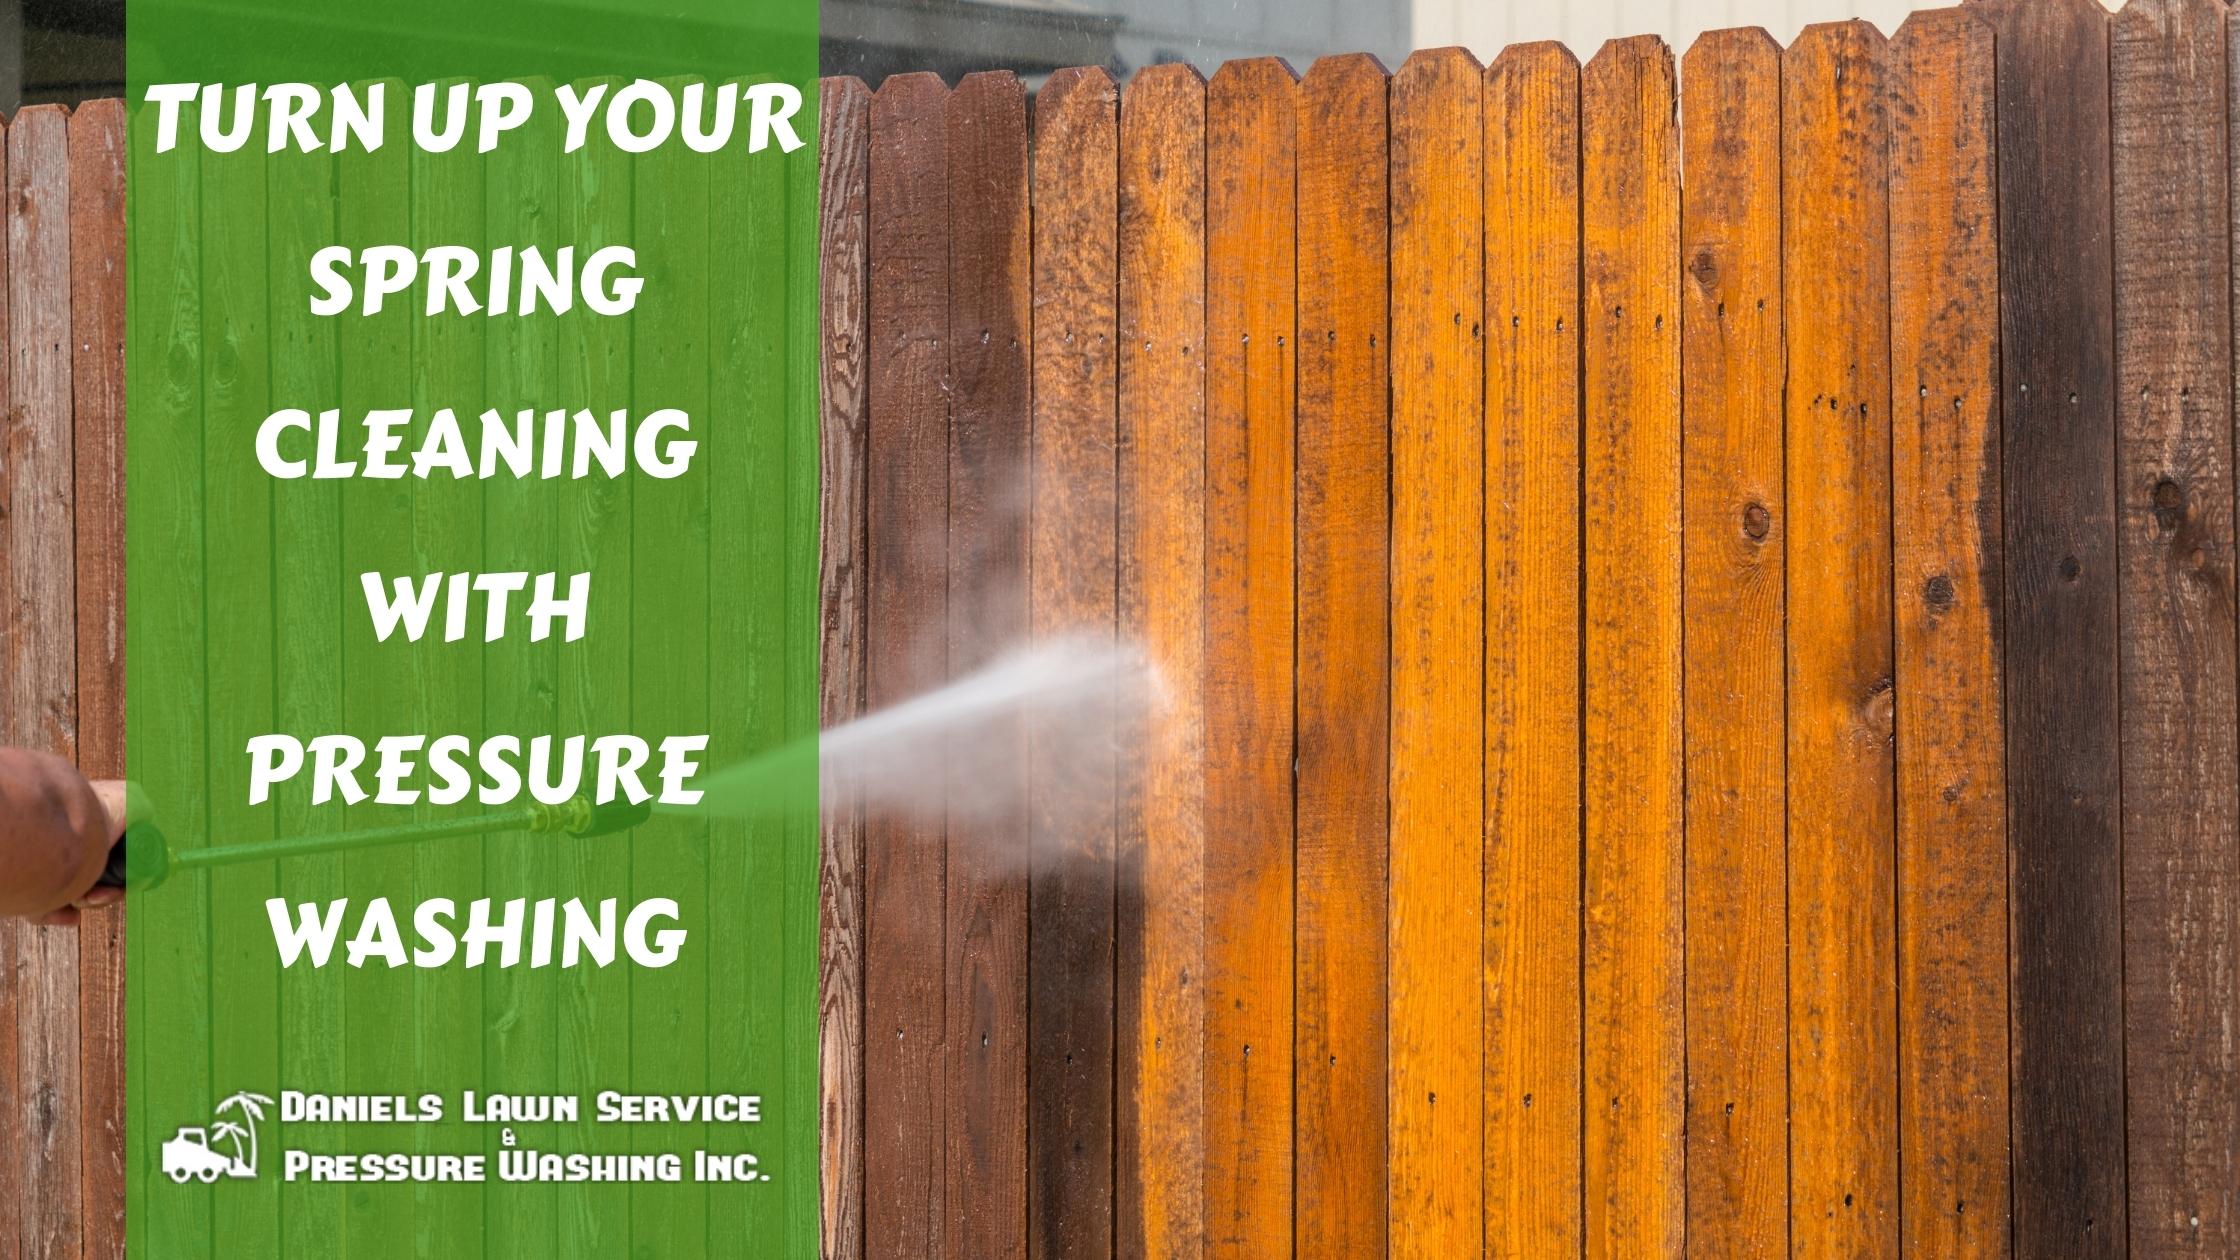 Turn Up Your Spring Cleaning With Pressure Washing